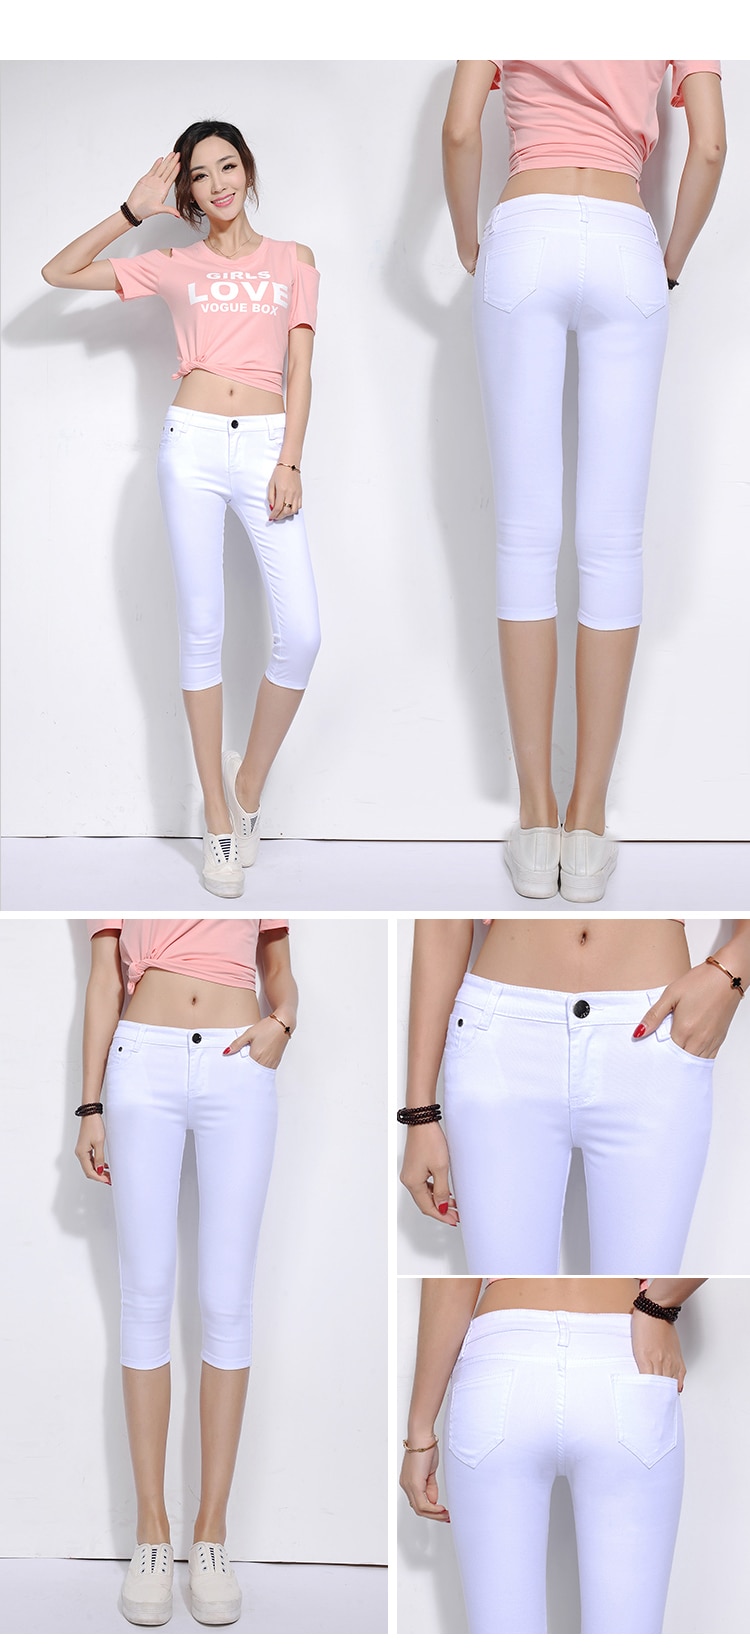 2018 New Spring Leisure Stretch Candy Color Cropped pants Female pencil pants Thin section Trousers Female feet Breeches (11)